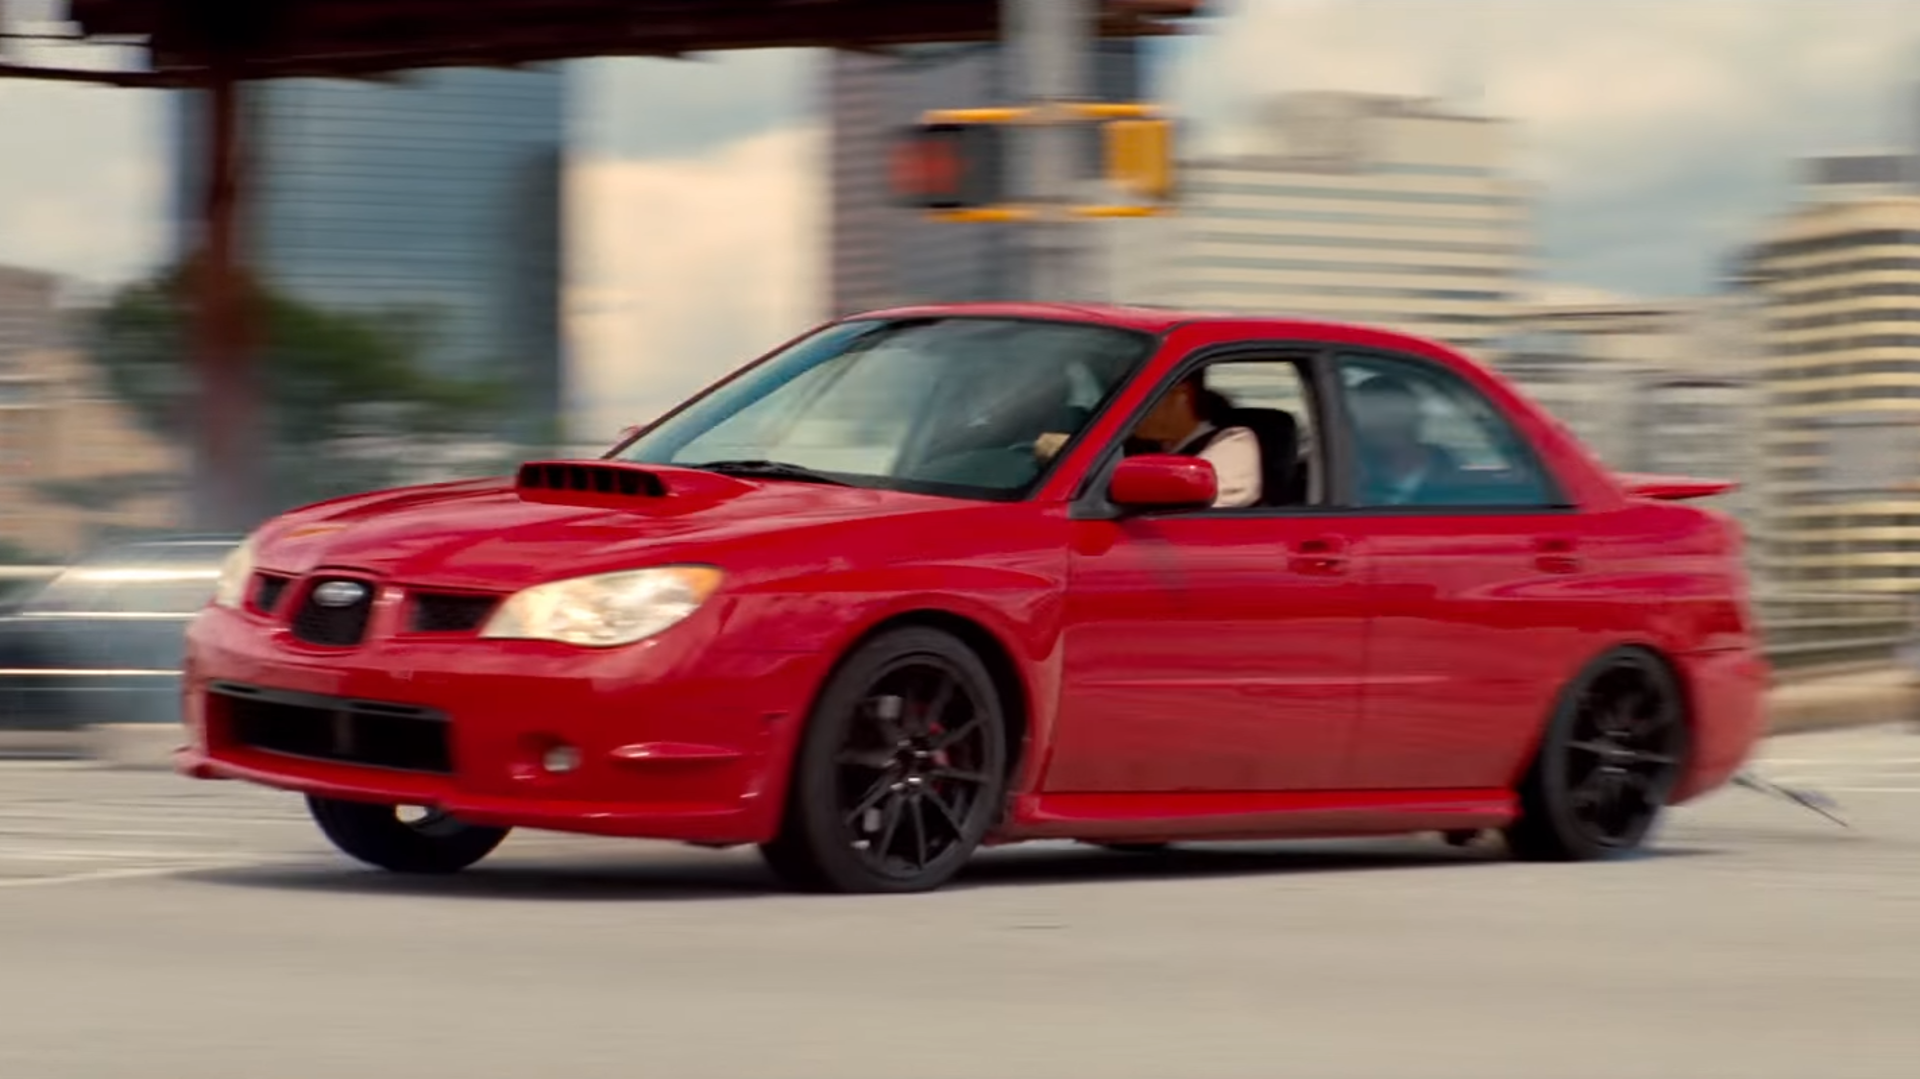 You Can Buy This RWD Subaru WRX from Baby Driver on eBay